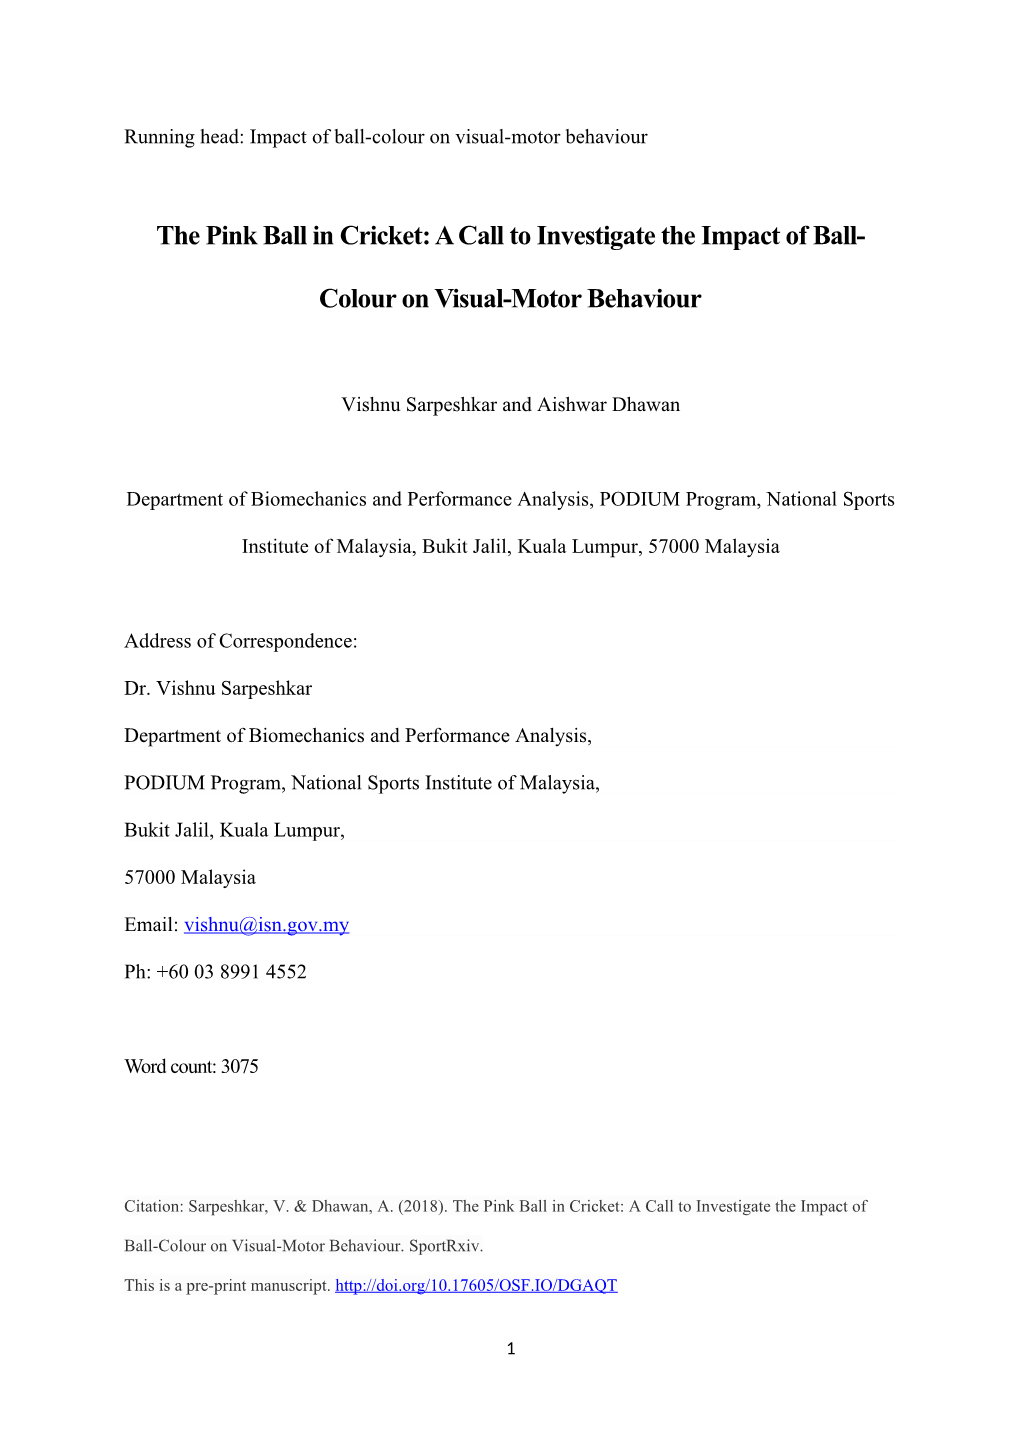 The Pink Ball in Cricket: a Call to Investigate the Impact of Ball